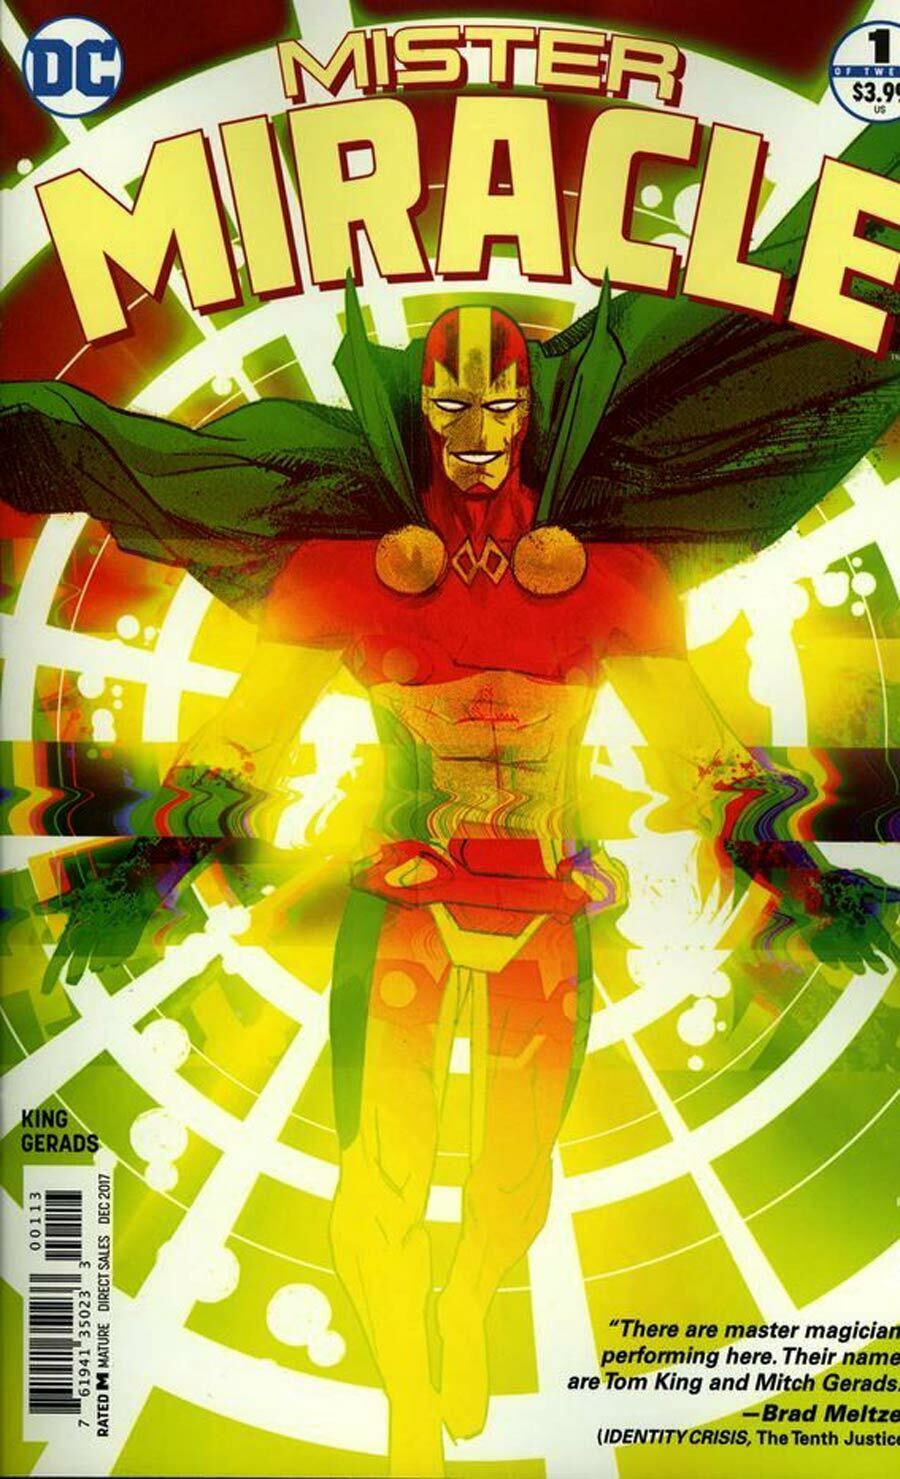 Mister Miracle (2017) #1 - 3rd Print